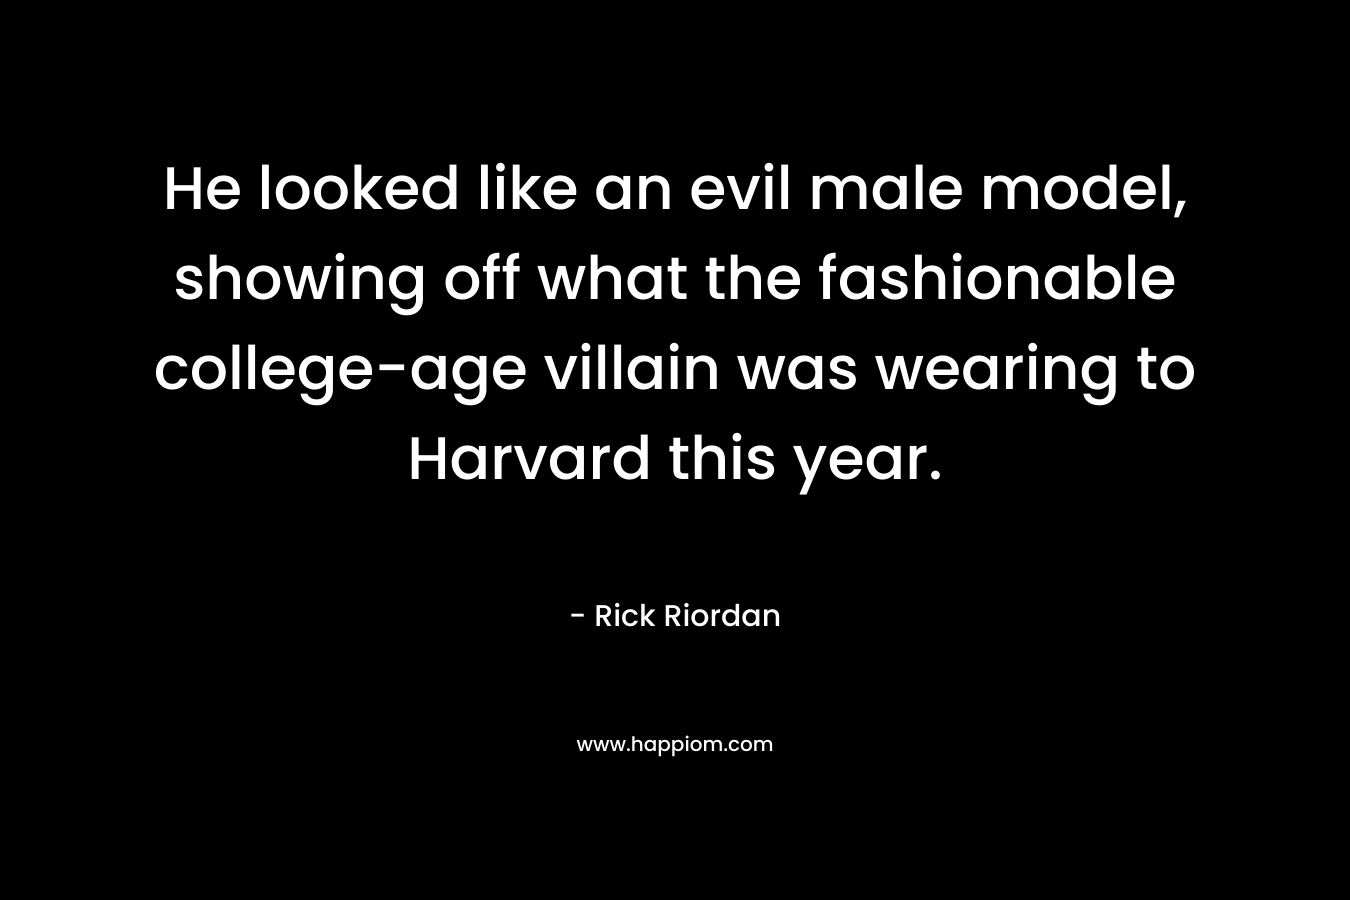 He looked like an evil male model, showing off what the fashionable college-age villain was wearing to Harvard this year. – Rick Riordan